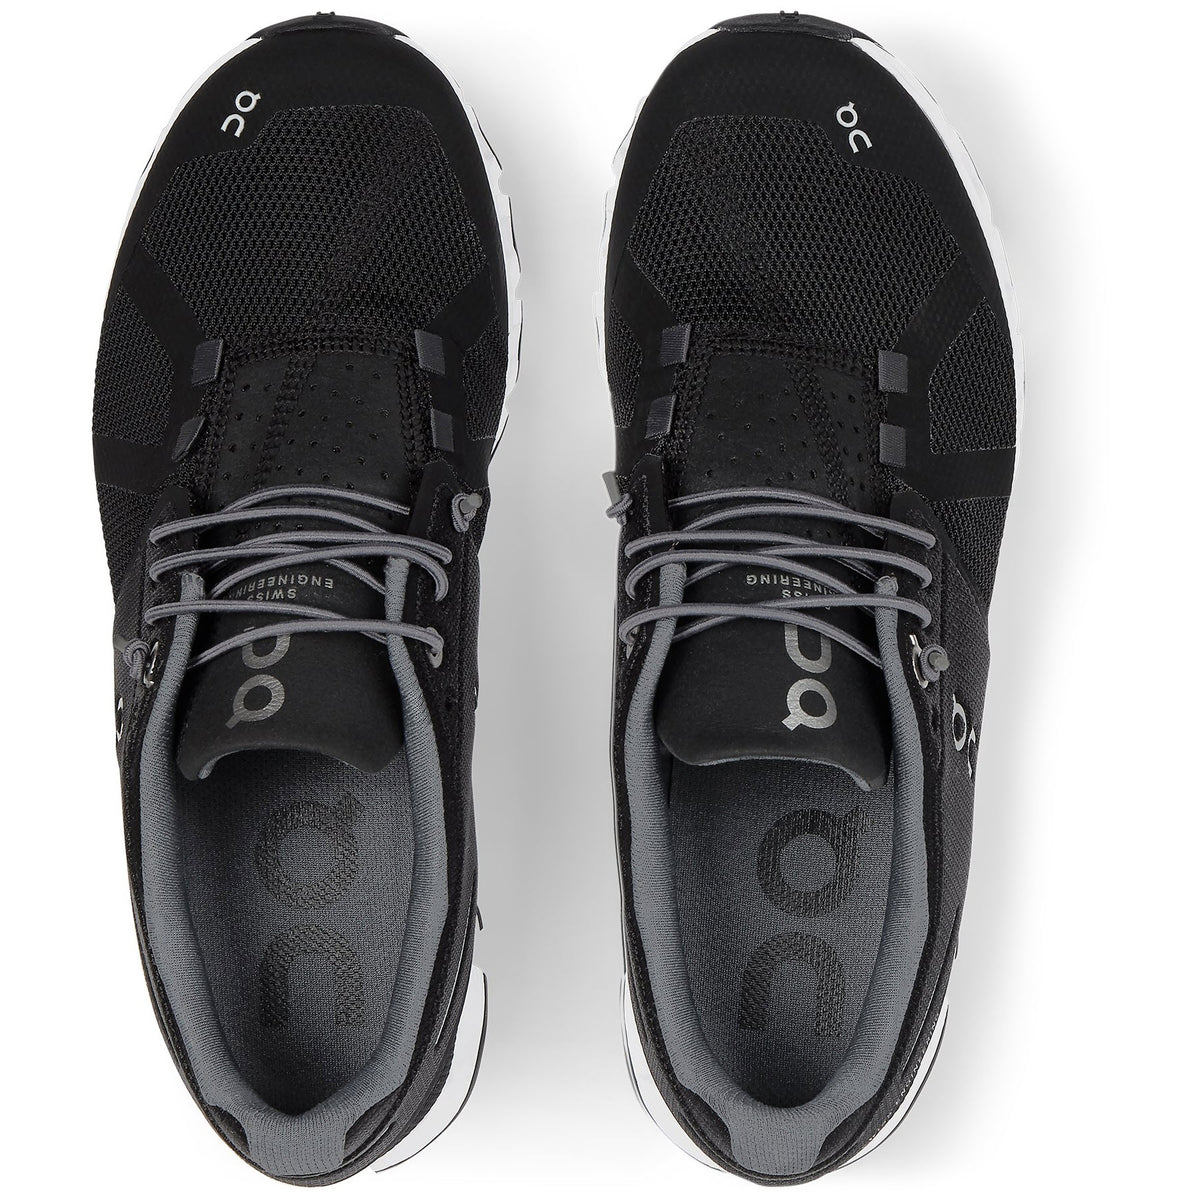 Top-down view of a pair of black On Running Cloud running shoes with a breathable mesh upper.